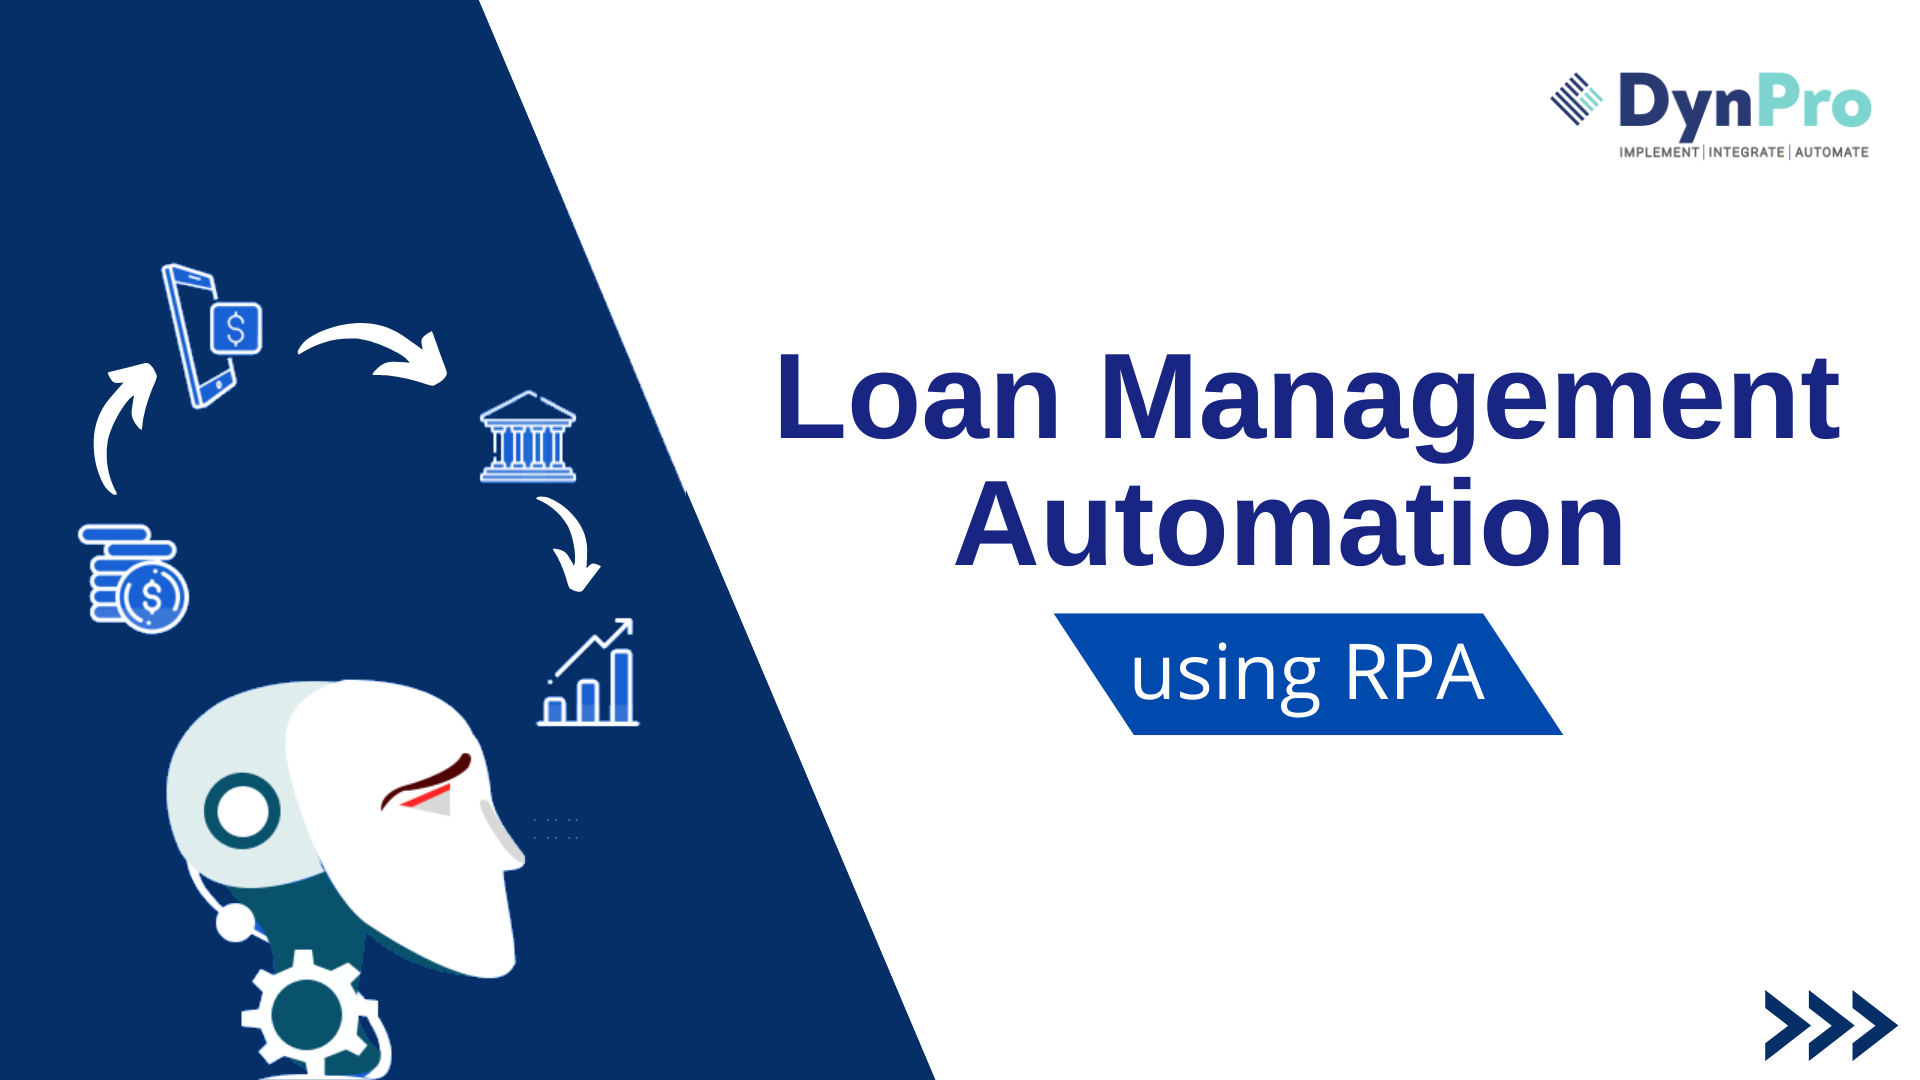 Loan Management Automation Using RPA